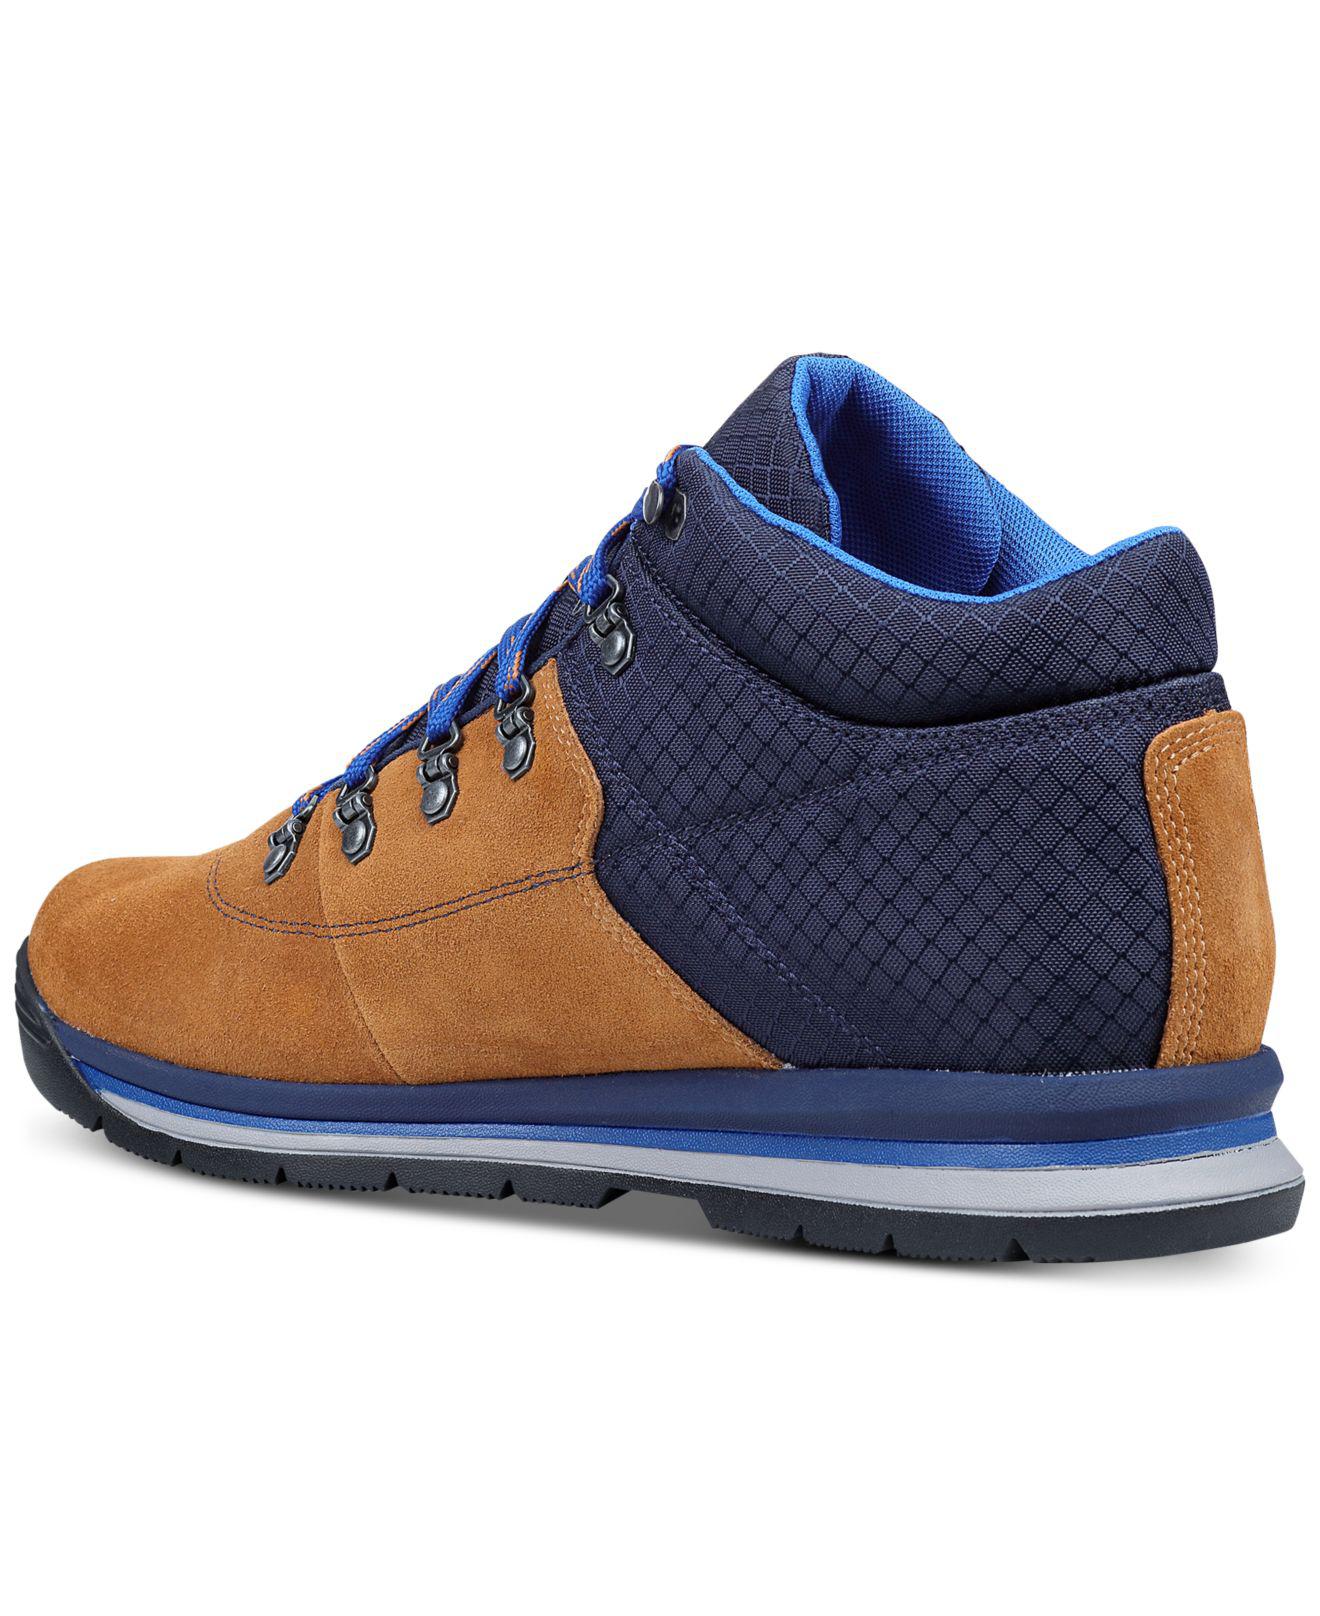 Timberland Leather Gt Rally Boots in Blue for Men - Lyst